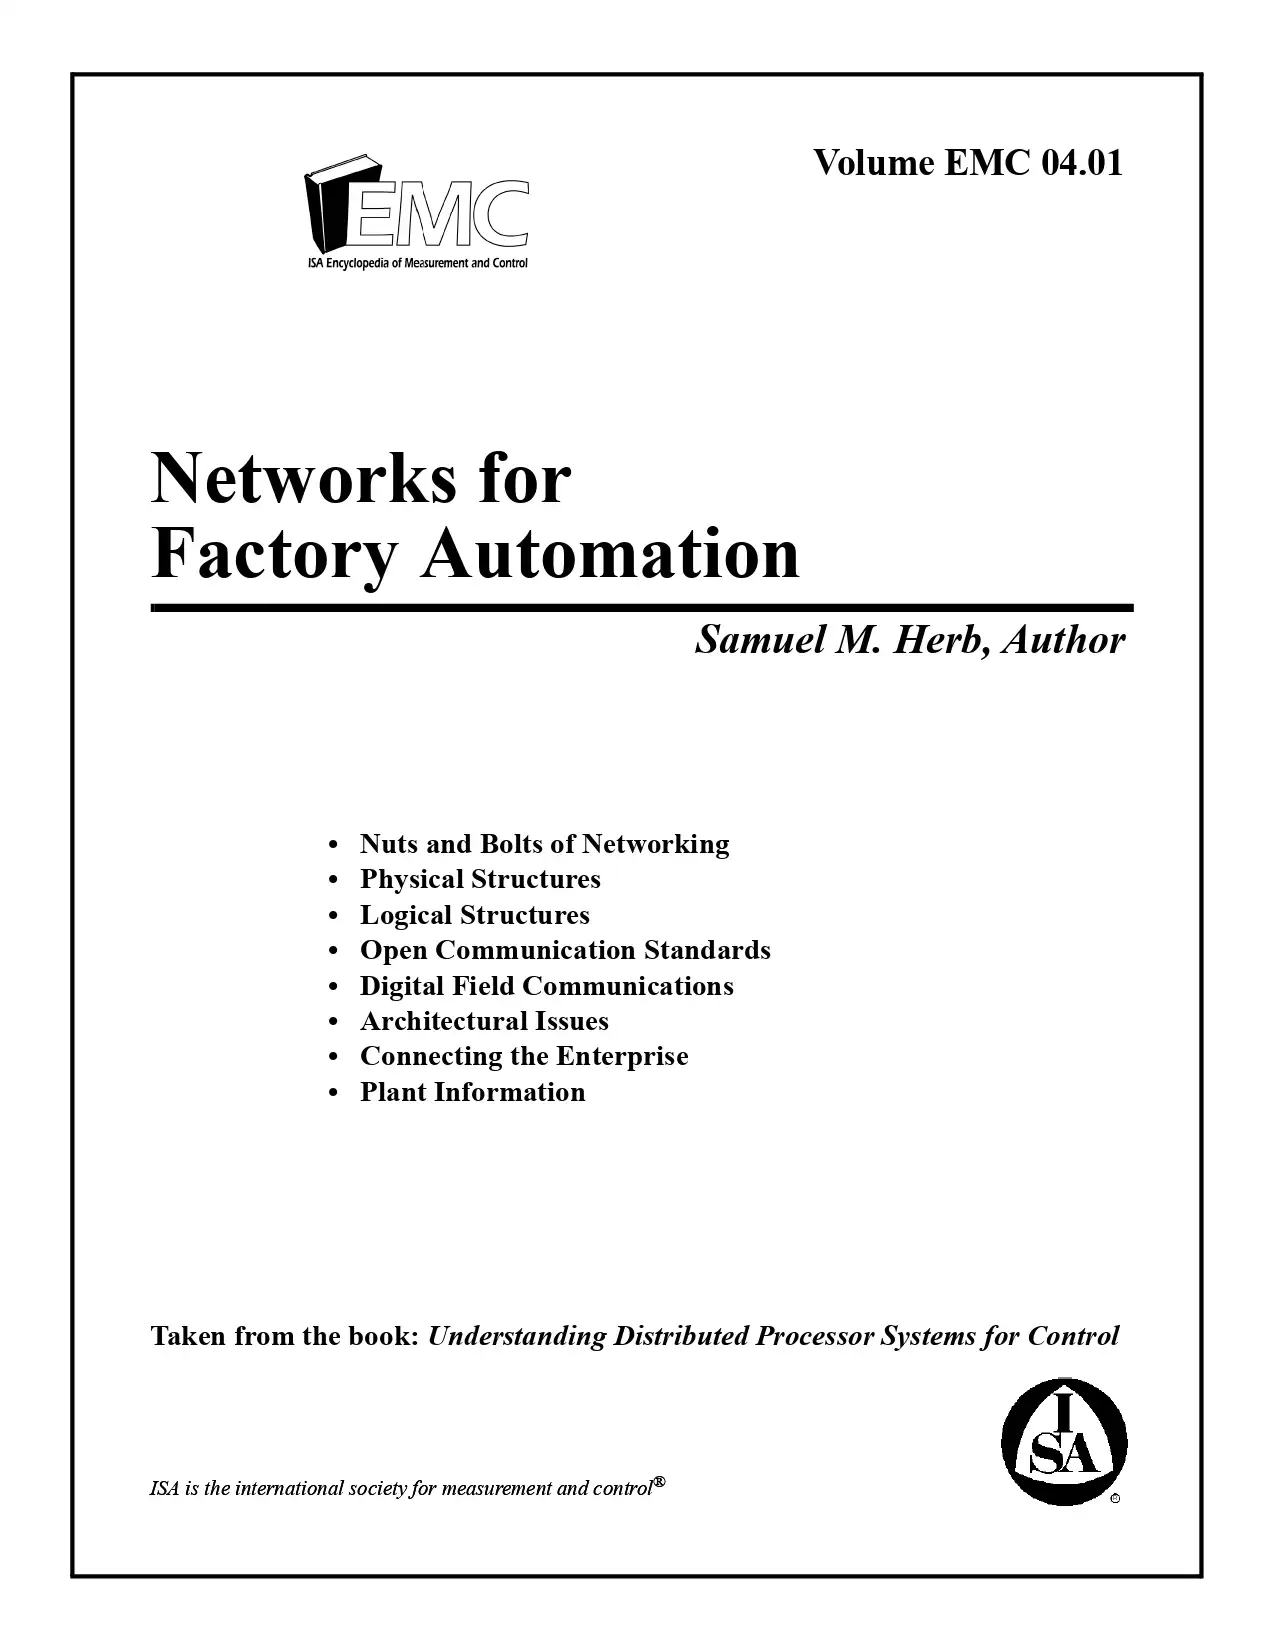 Networks for Factory Automation